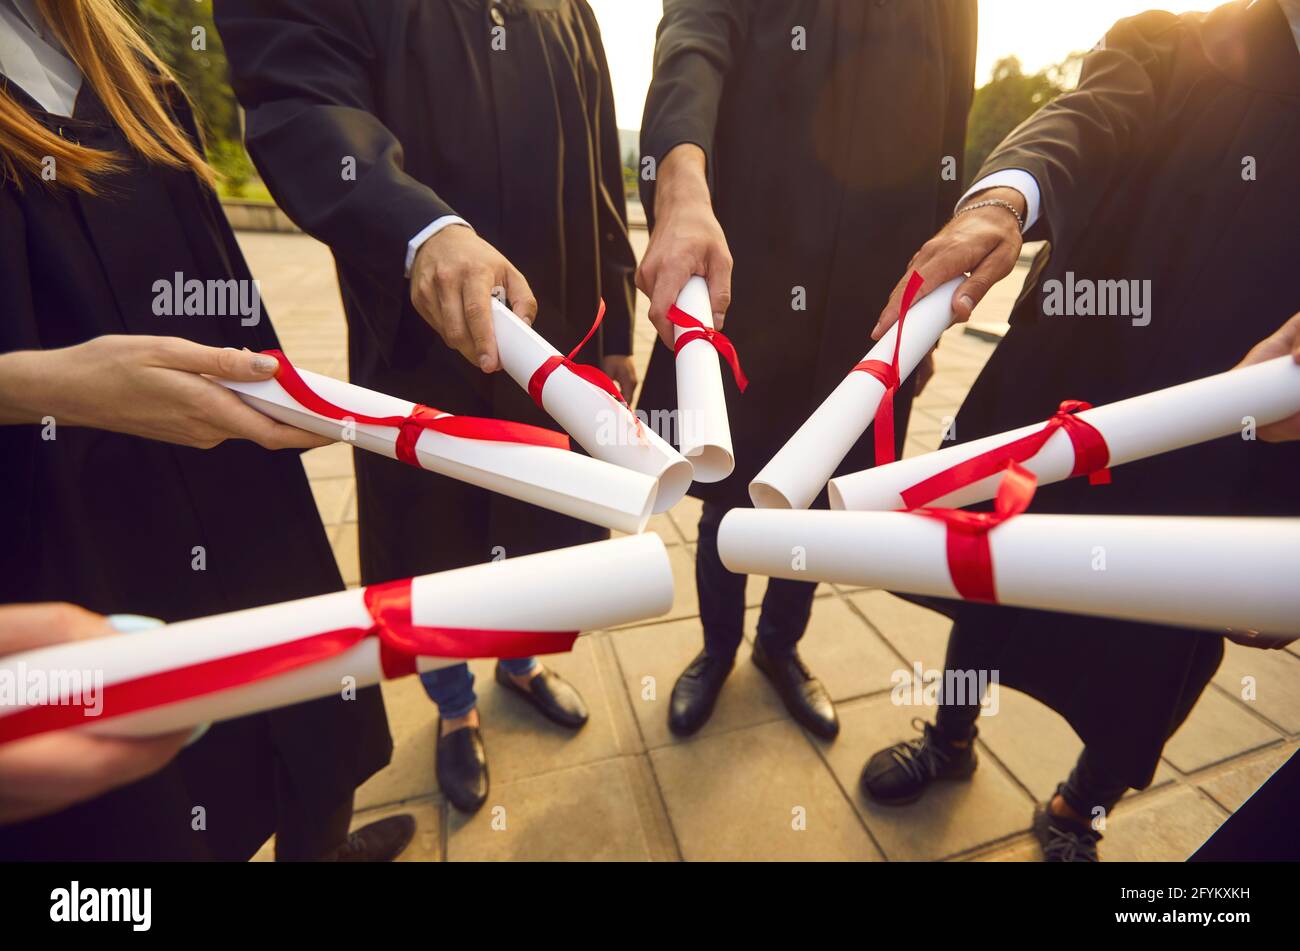 University or college graduates join diplomas standing in circle at graduation party Stock Photo